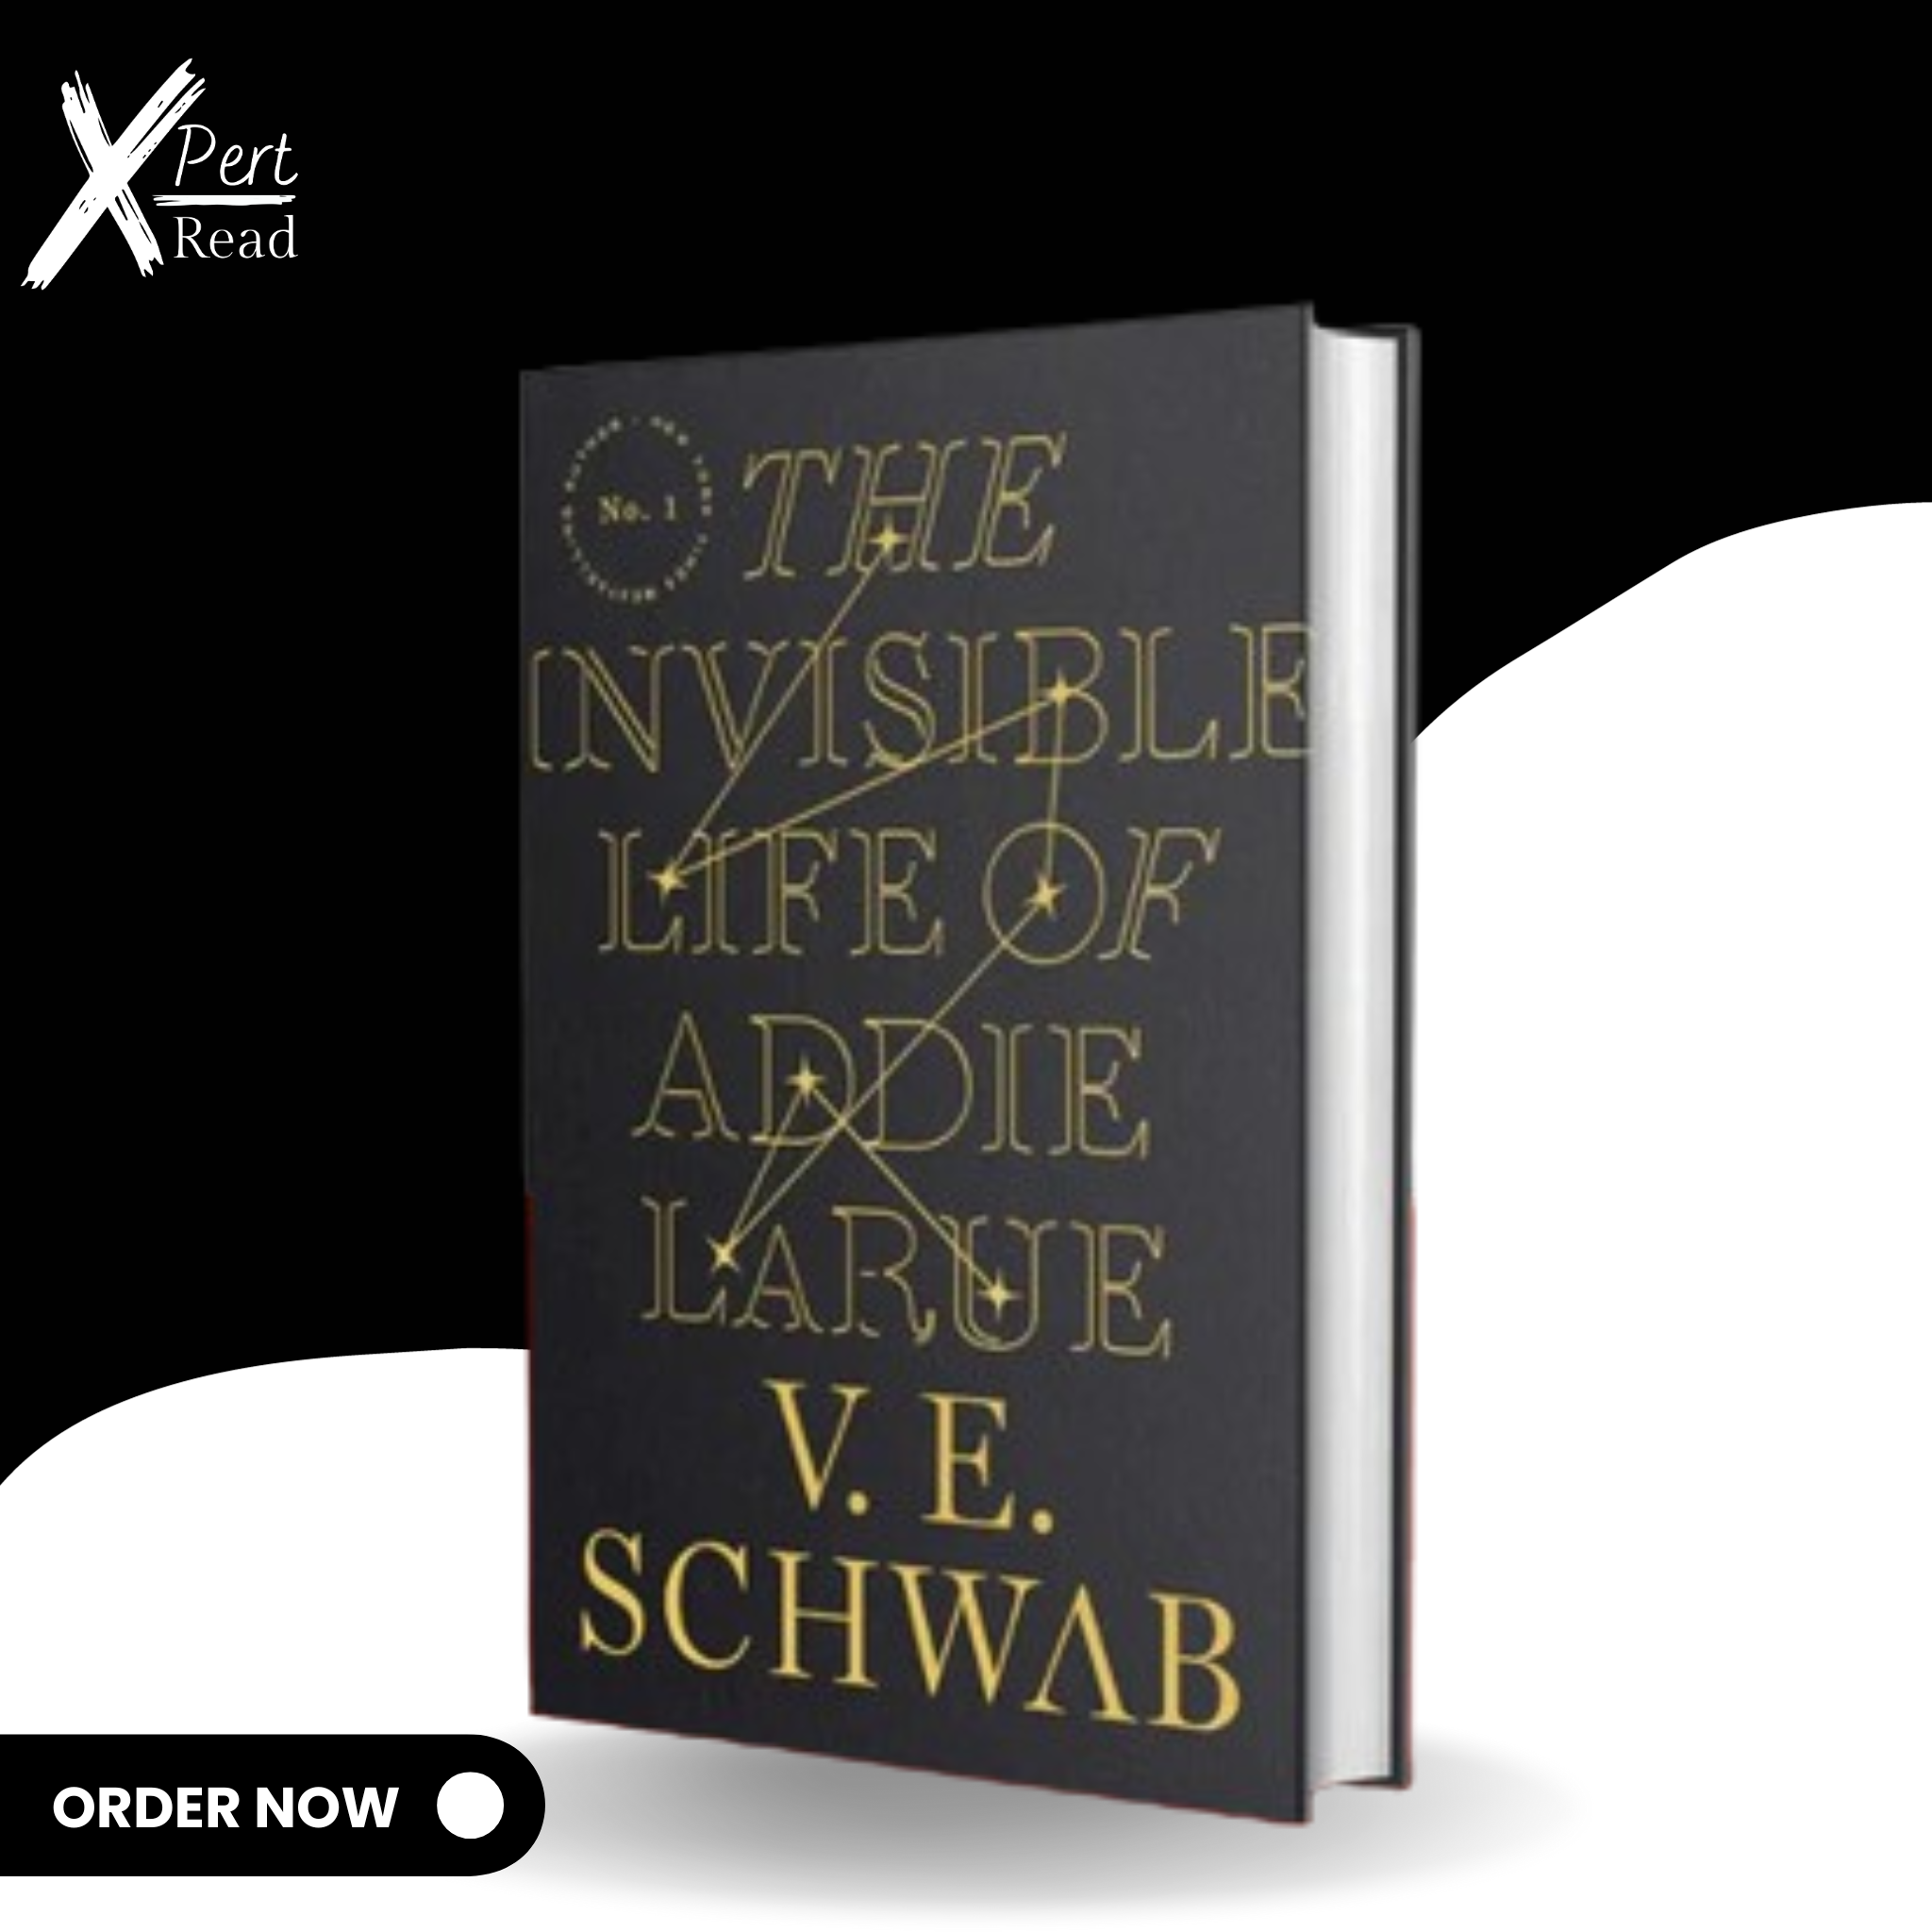 The Invisible Life of Addie LaRue By V. E. Schwab (Original Hardcover)